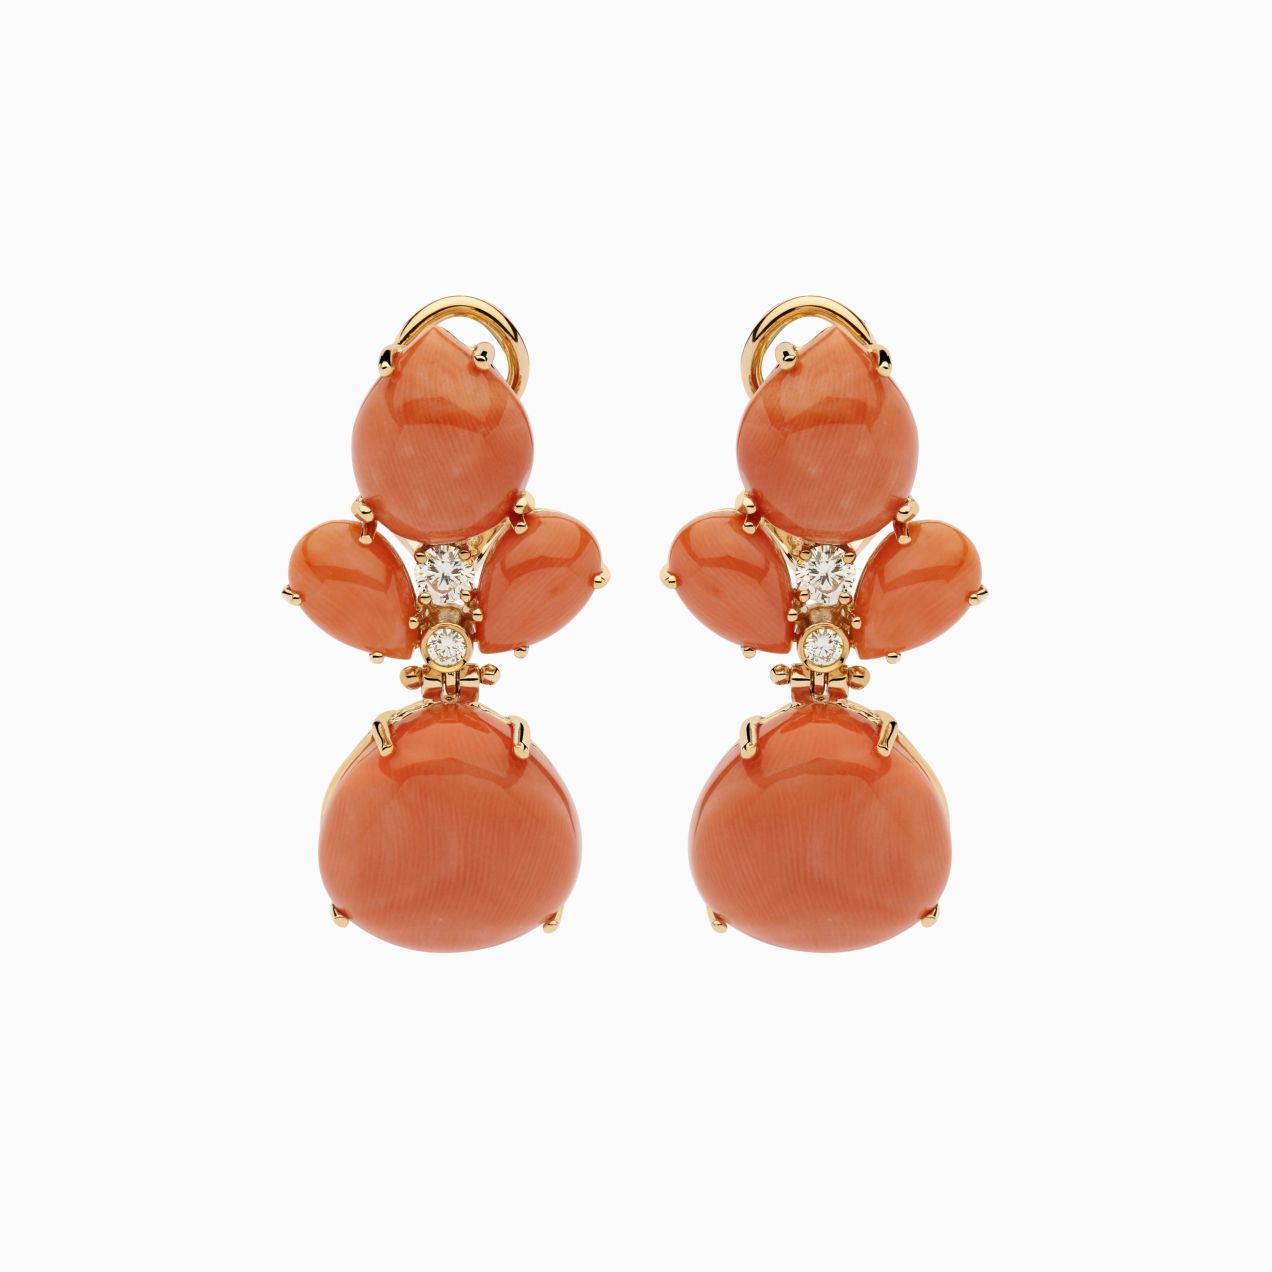 Rose gold earrings with coral gems and diamonds